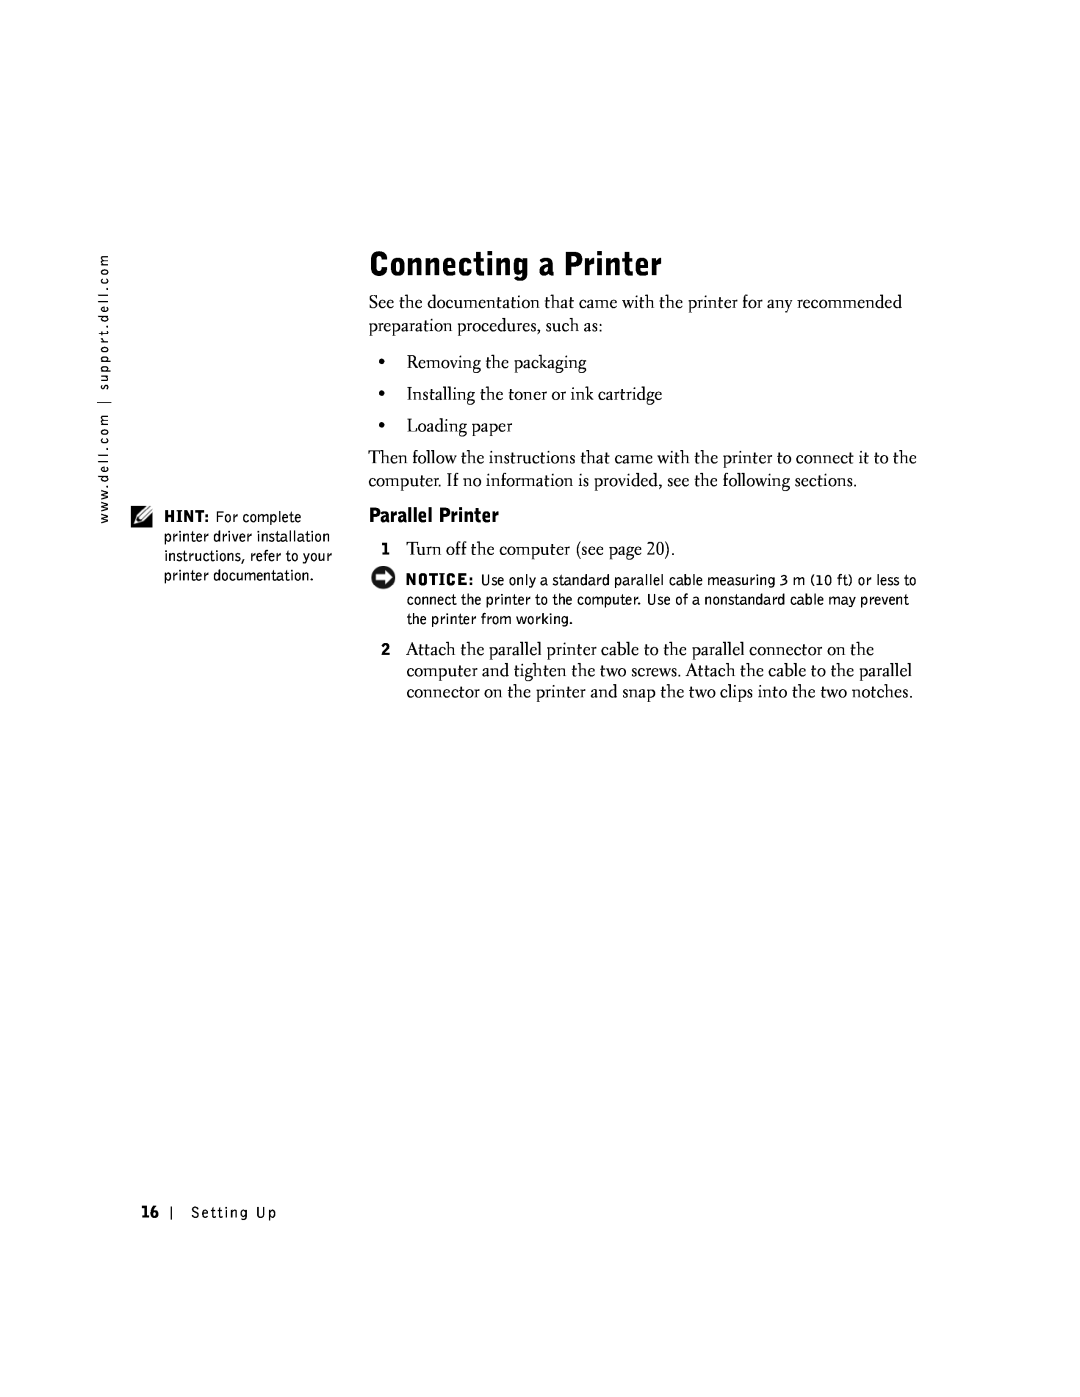 Dell 100N owner manual Connecting a Printer, Parallel Printer 